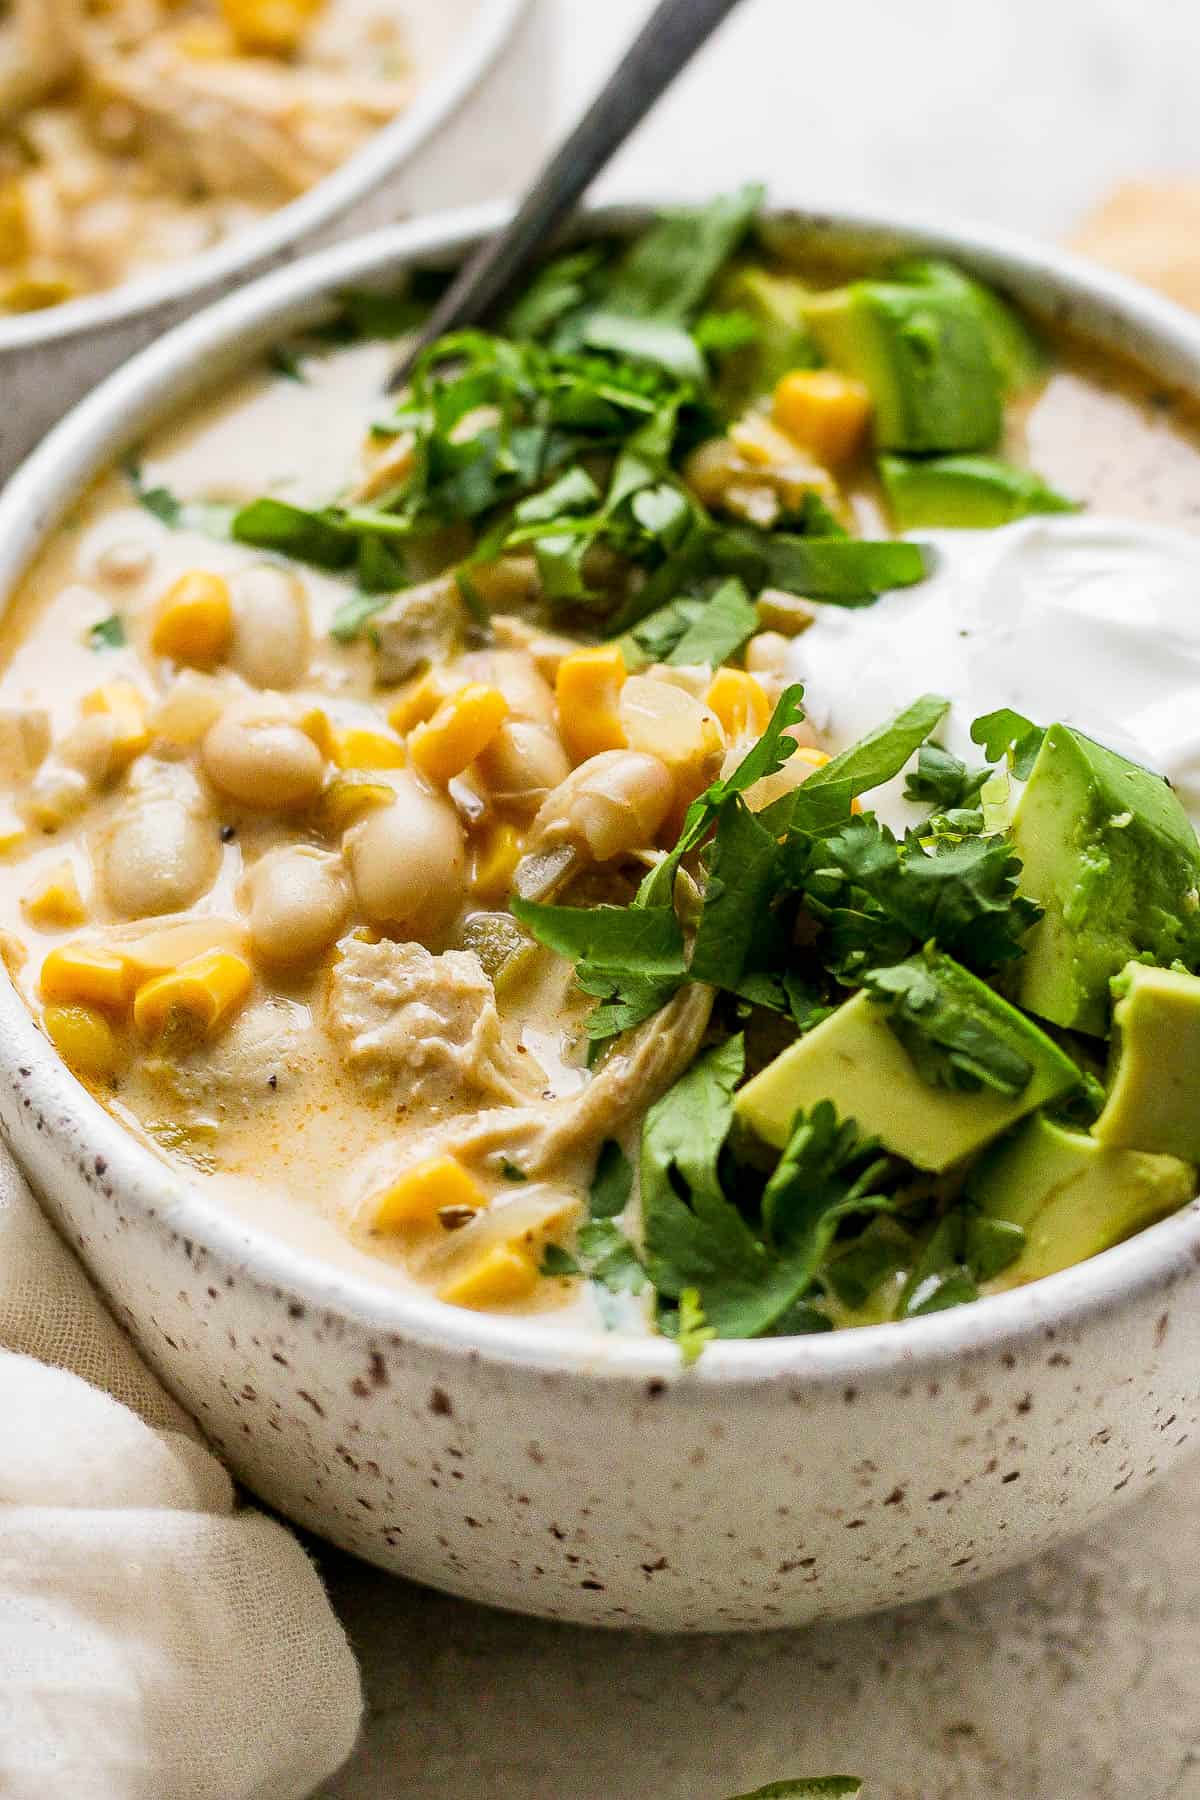 White chicken chili in a bowl ready to eat.